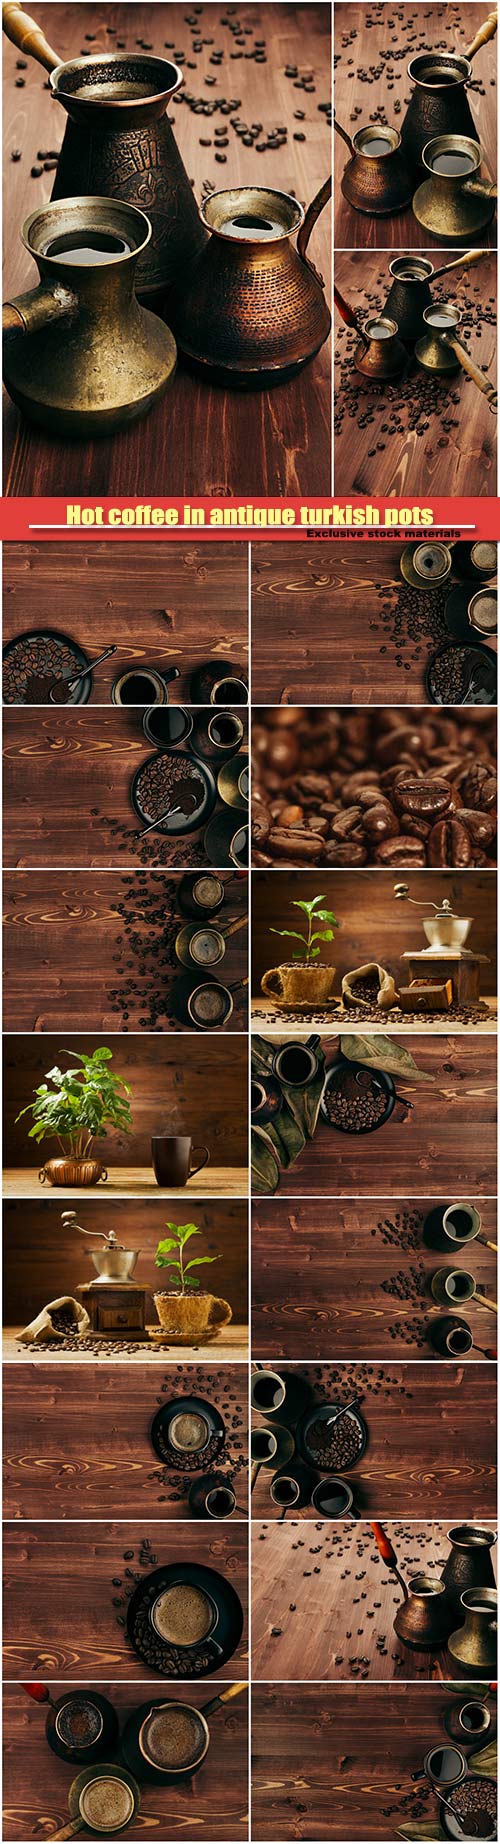 Hot coffee in antique turkish pots, beans on brown old wooden board background